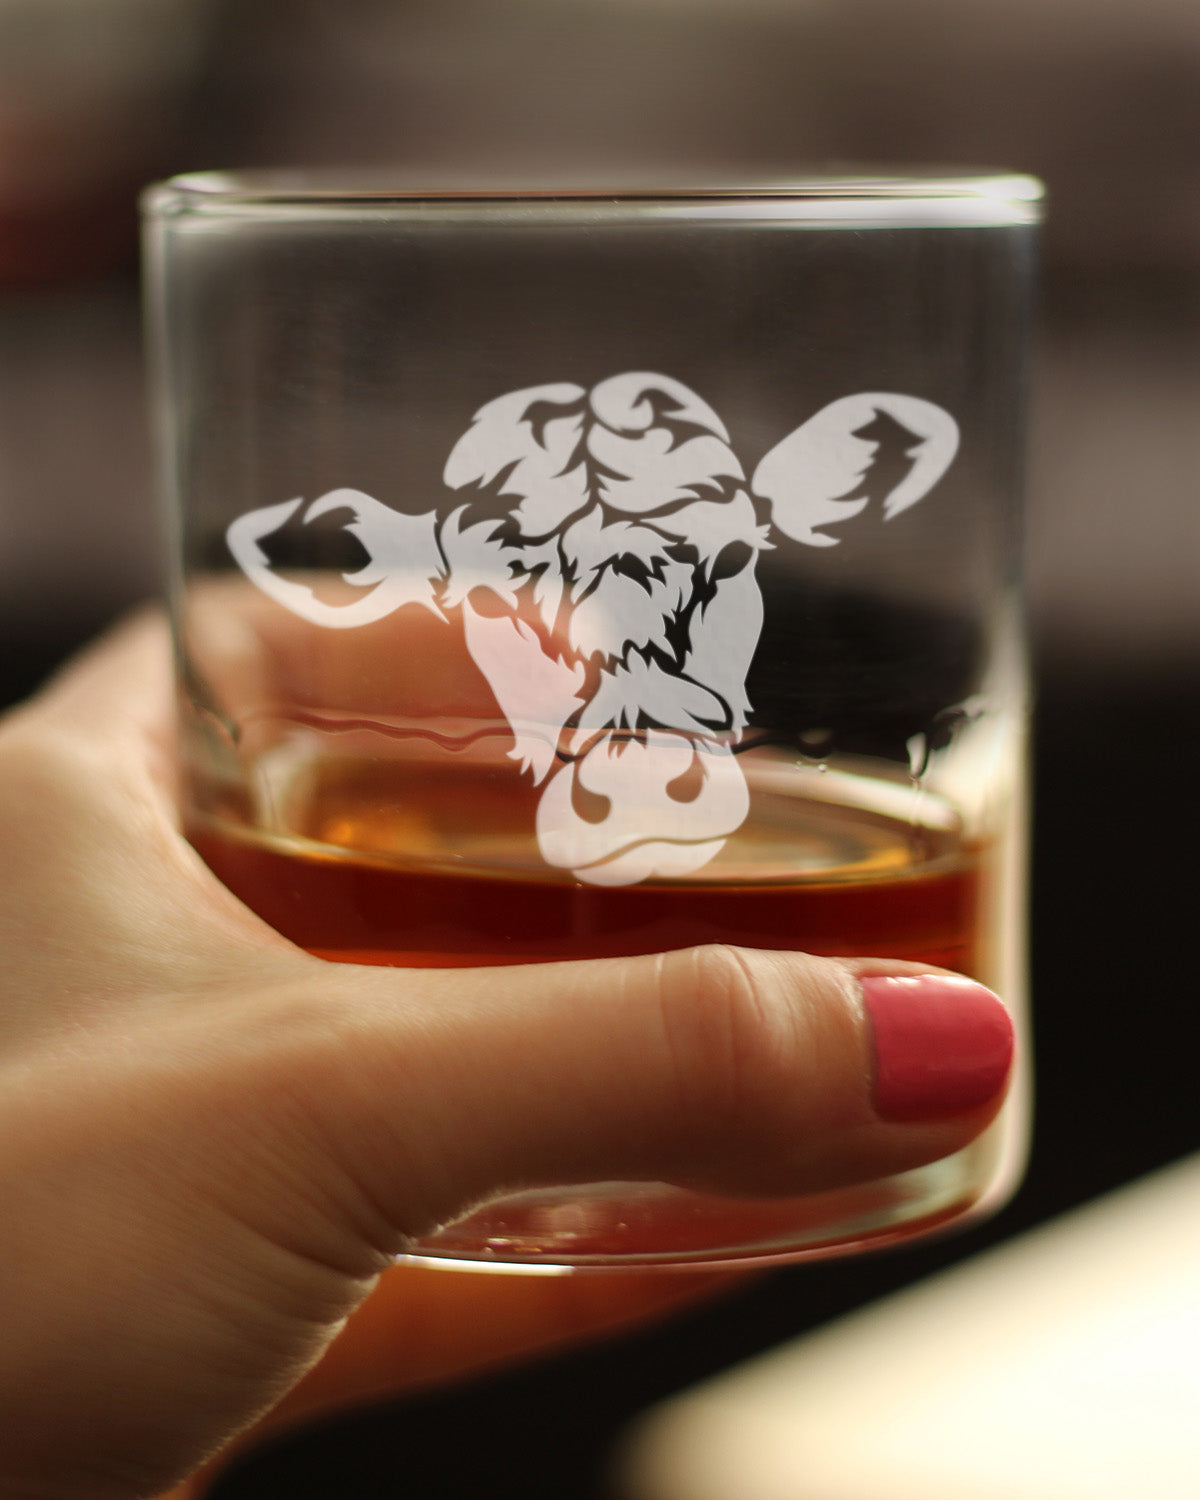 Cow Face Whiskey Rocks Glass - Funny Unique Farm Animal Themed Decor and Gifts for Cow Lovers - 10.25 Oz